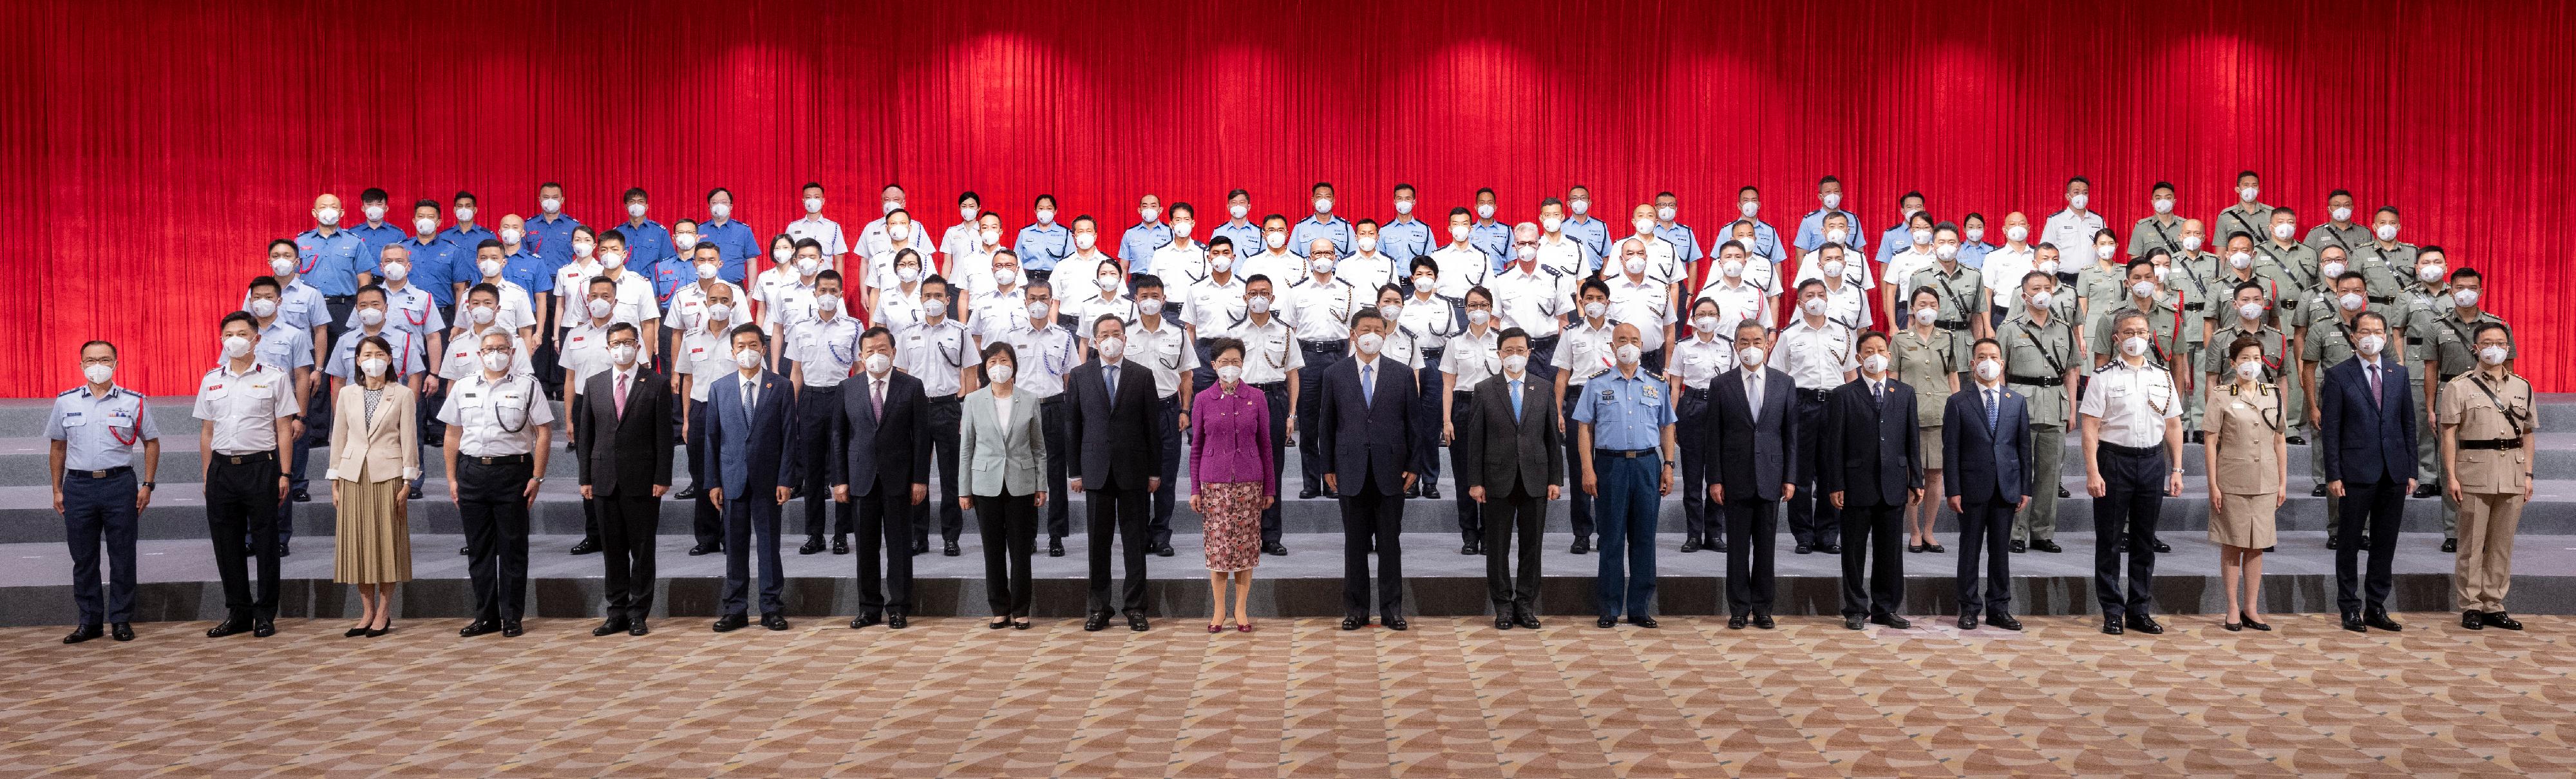 President Xi Jinping (front row, 11th left); the Chief Executive, Mrs Carrie Lam (front row, 10th left); and the Chief Executive-elect, Mr John Lee (front row, 12th left), in a group photo with representatives of the disciplined services at the Hong Kong Convention and Exhibition Centre this afternoon (June 30).